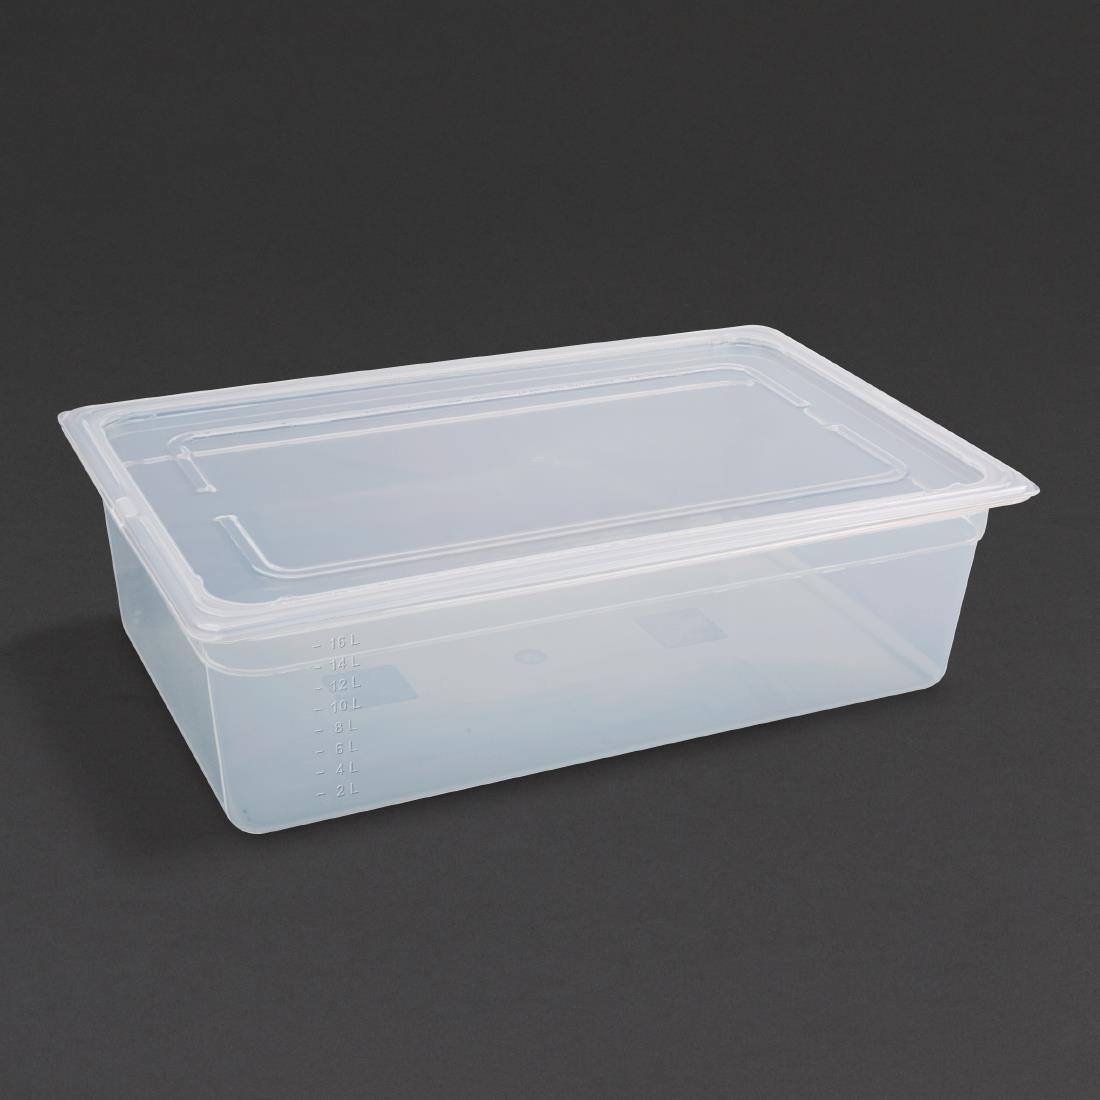 Vogue Polypropylene 1/1 Gastronorm Container with Lid 150mm (Pack of 2) - GJ512  - 1